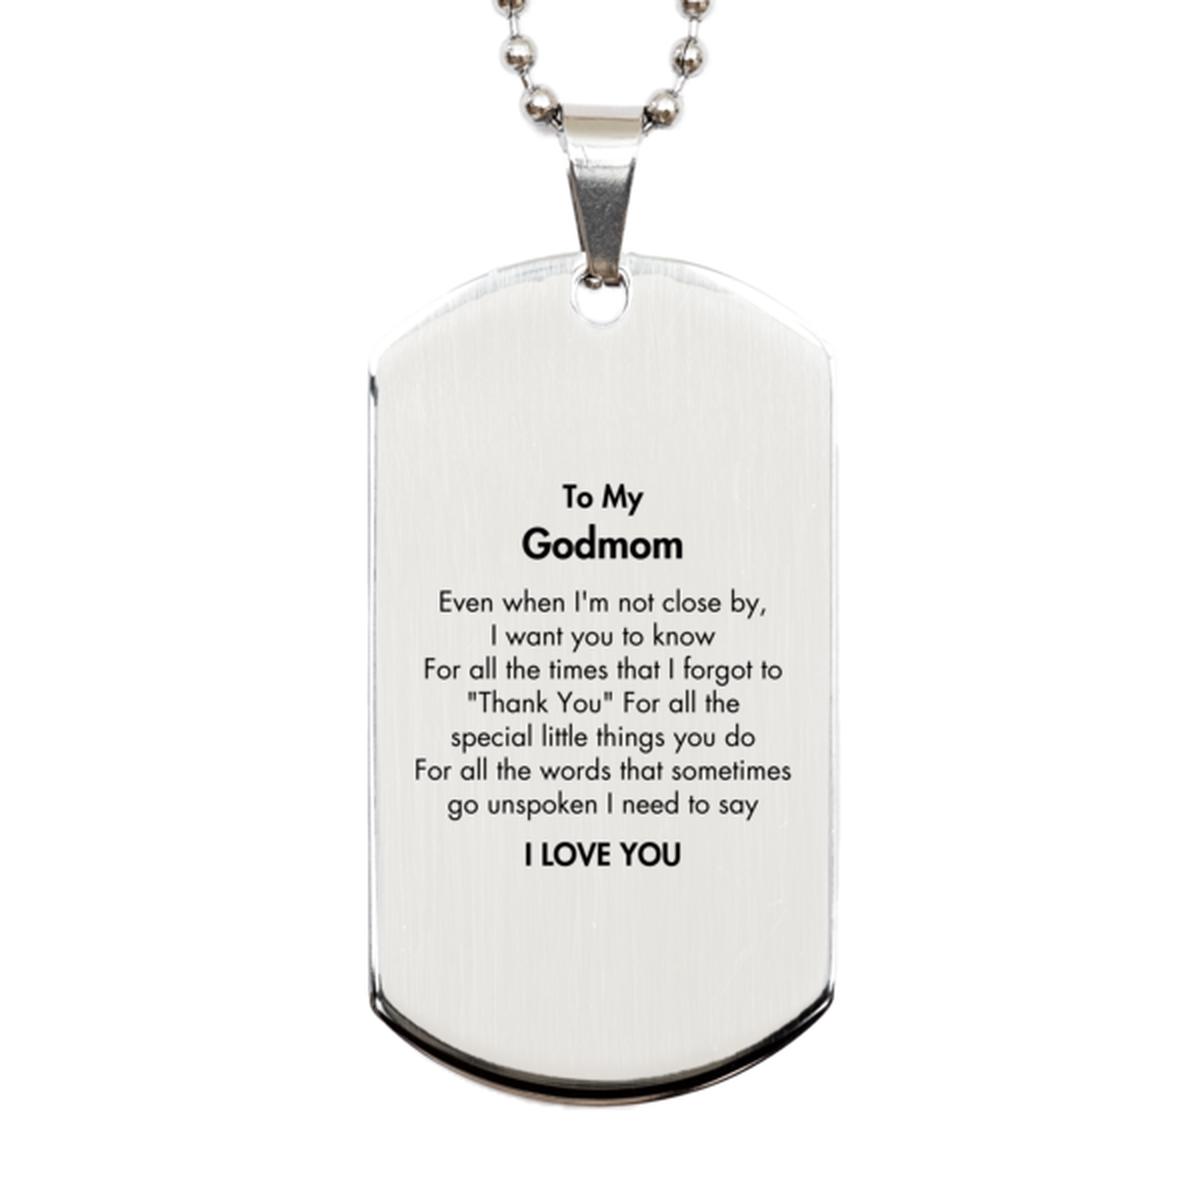 Thank You Gifts for Godmom, Keepsake Silver Dog Tag Gifts for Godmom Birthday Mother's day Father's Day Godmom For all the words That sometimes go unspoken I need to say I LOVE YOU